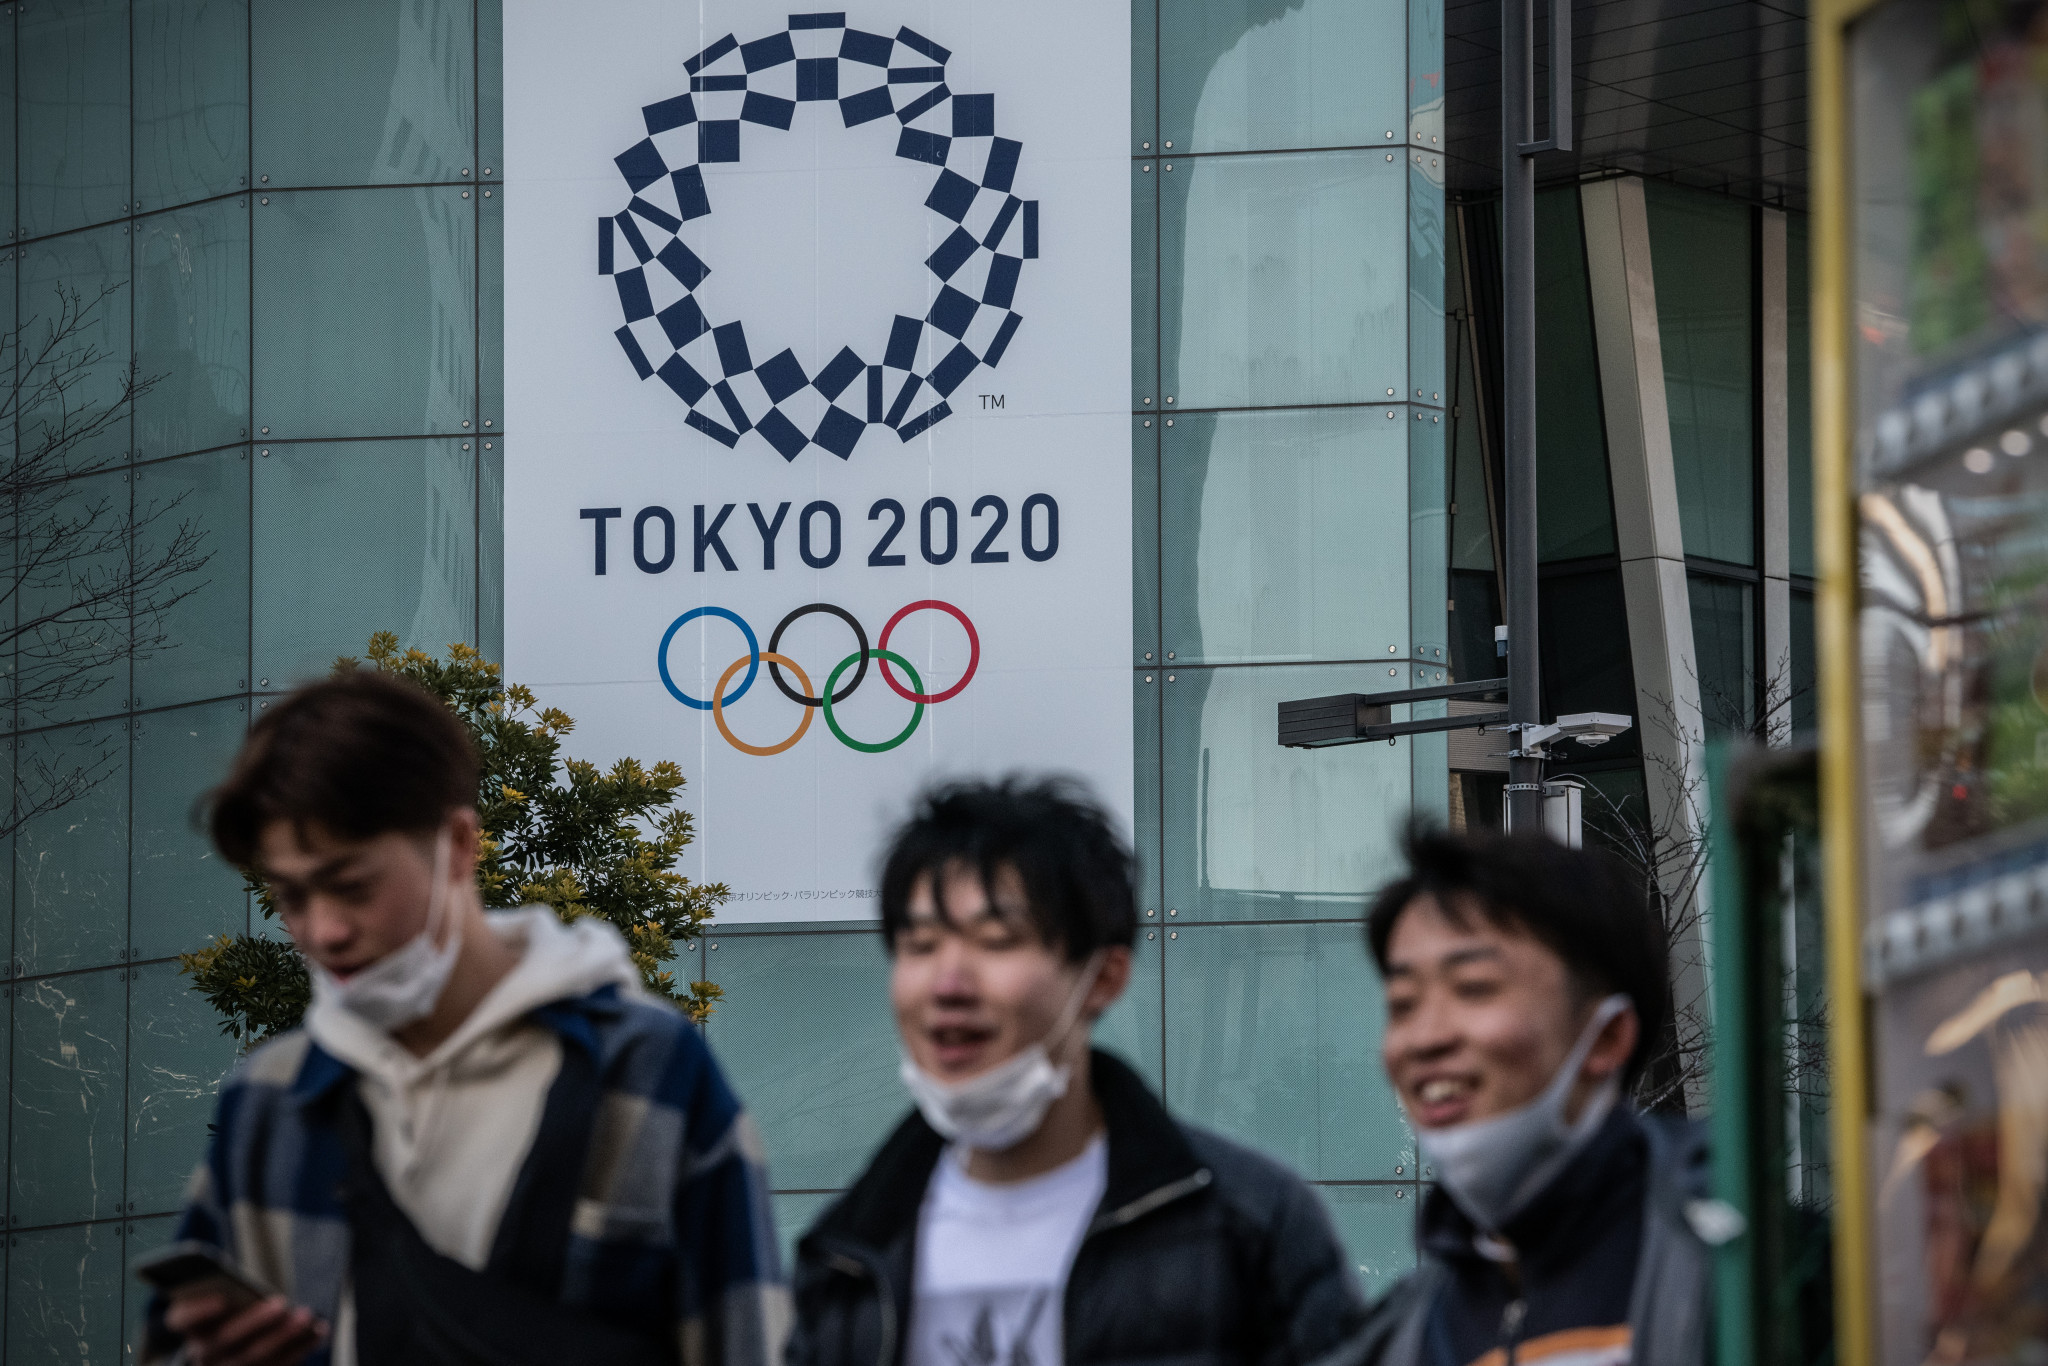 Tokyo 2020 volunteers receive apology after Mori's sexist comments